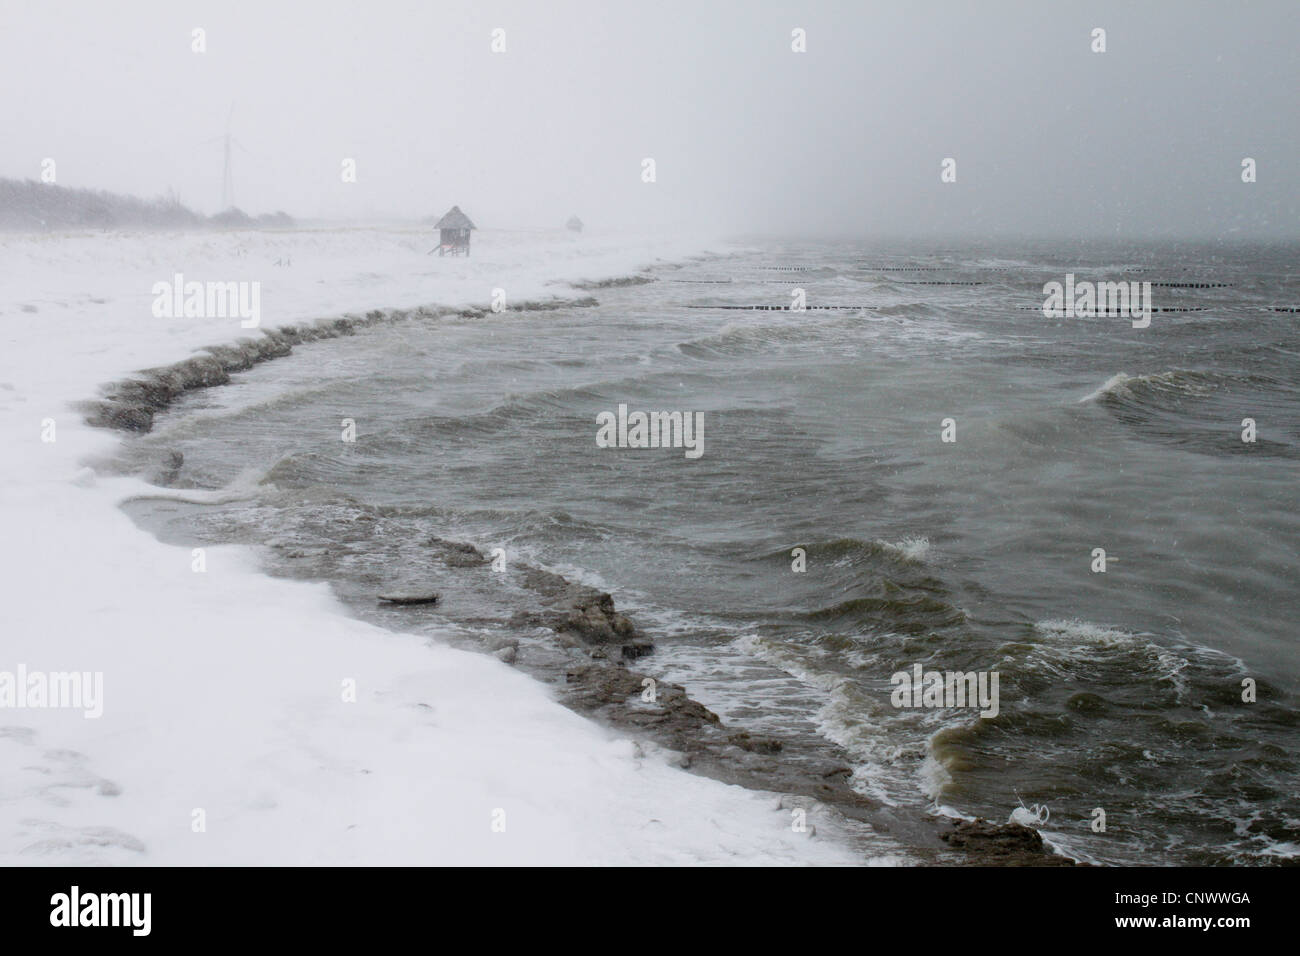 cold winter storm at the Baltic sea, Germany, Mecklenburg-Western Pomerania, Wustrow, Darss Stock Photo